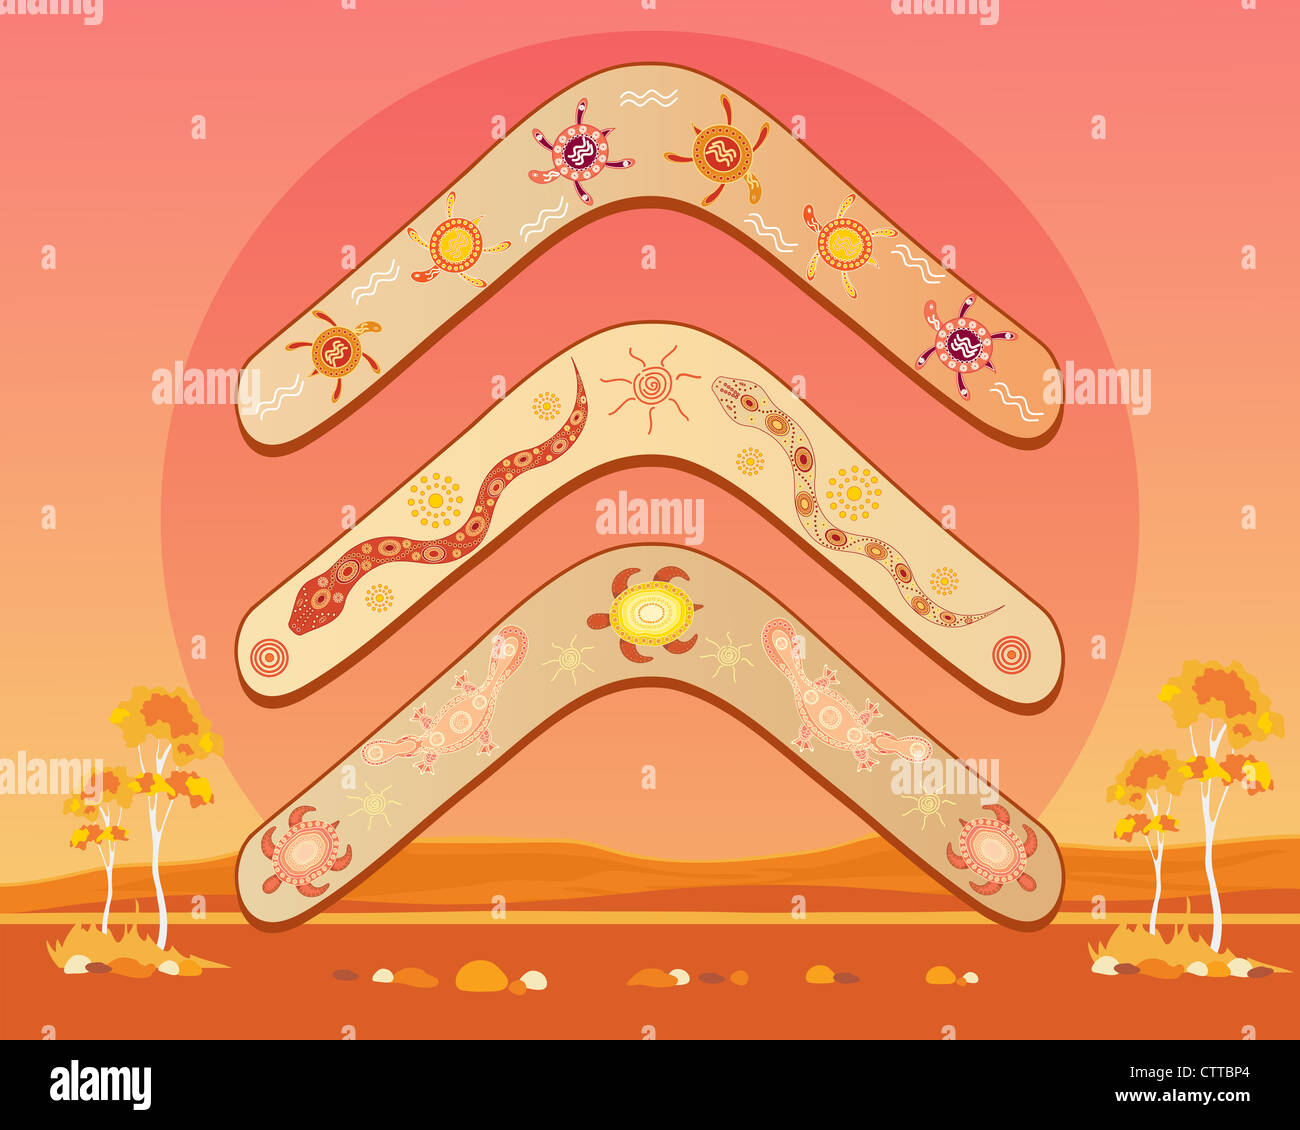 an illustration of an abstract Australian landscape with three different designs of boomerang with a hot outback sun in a greeting card format Stock Photo